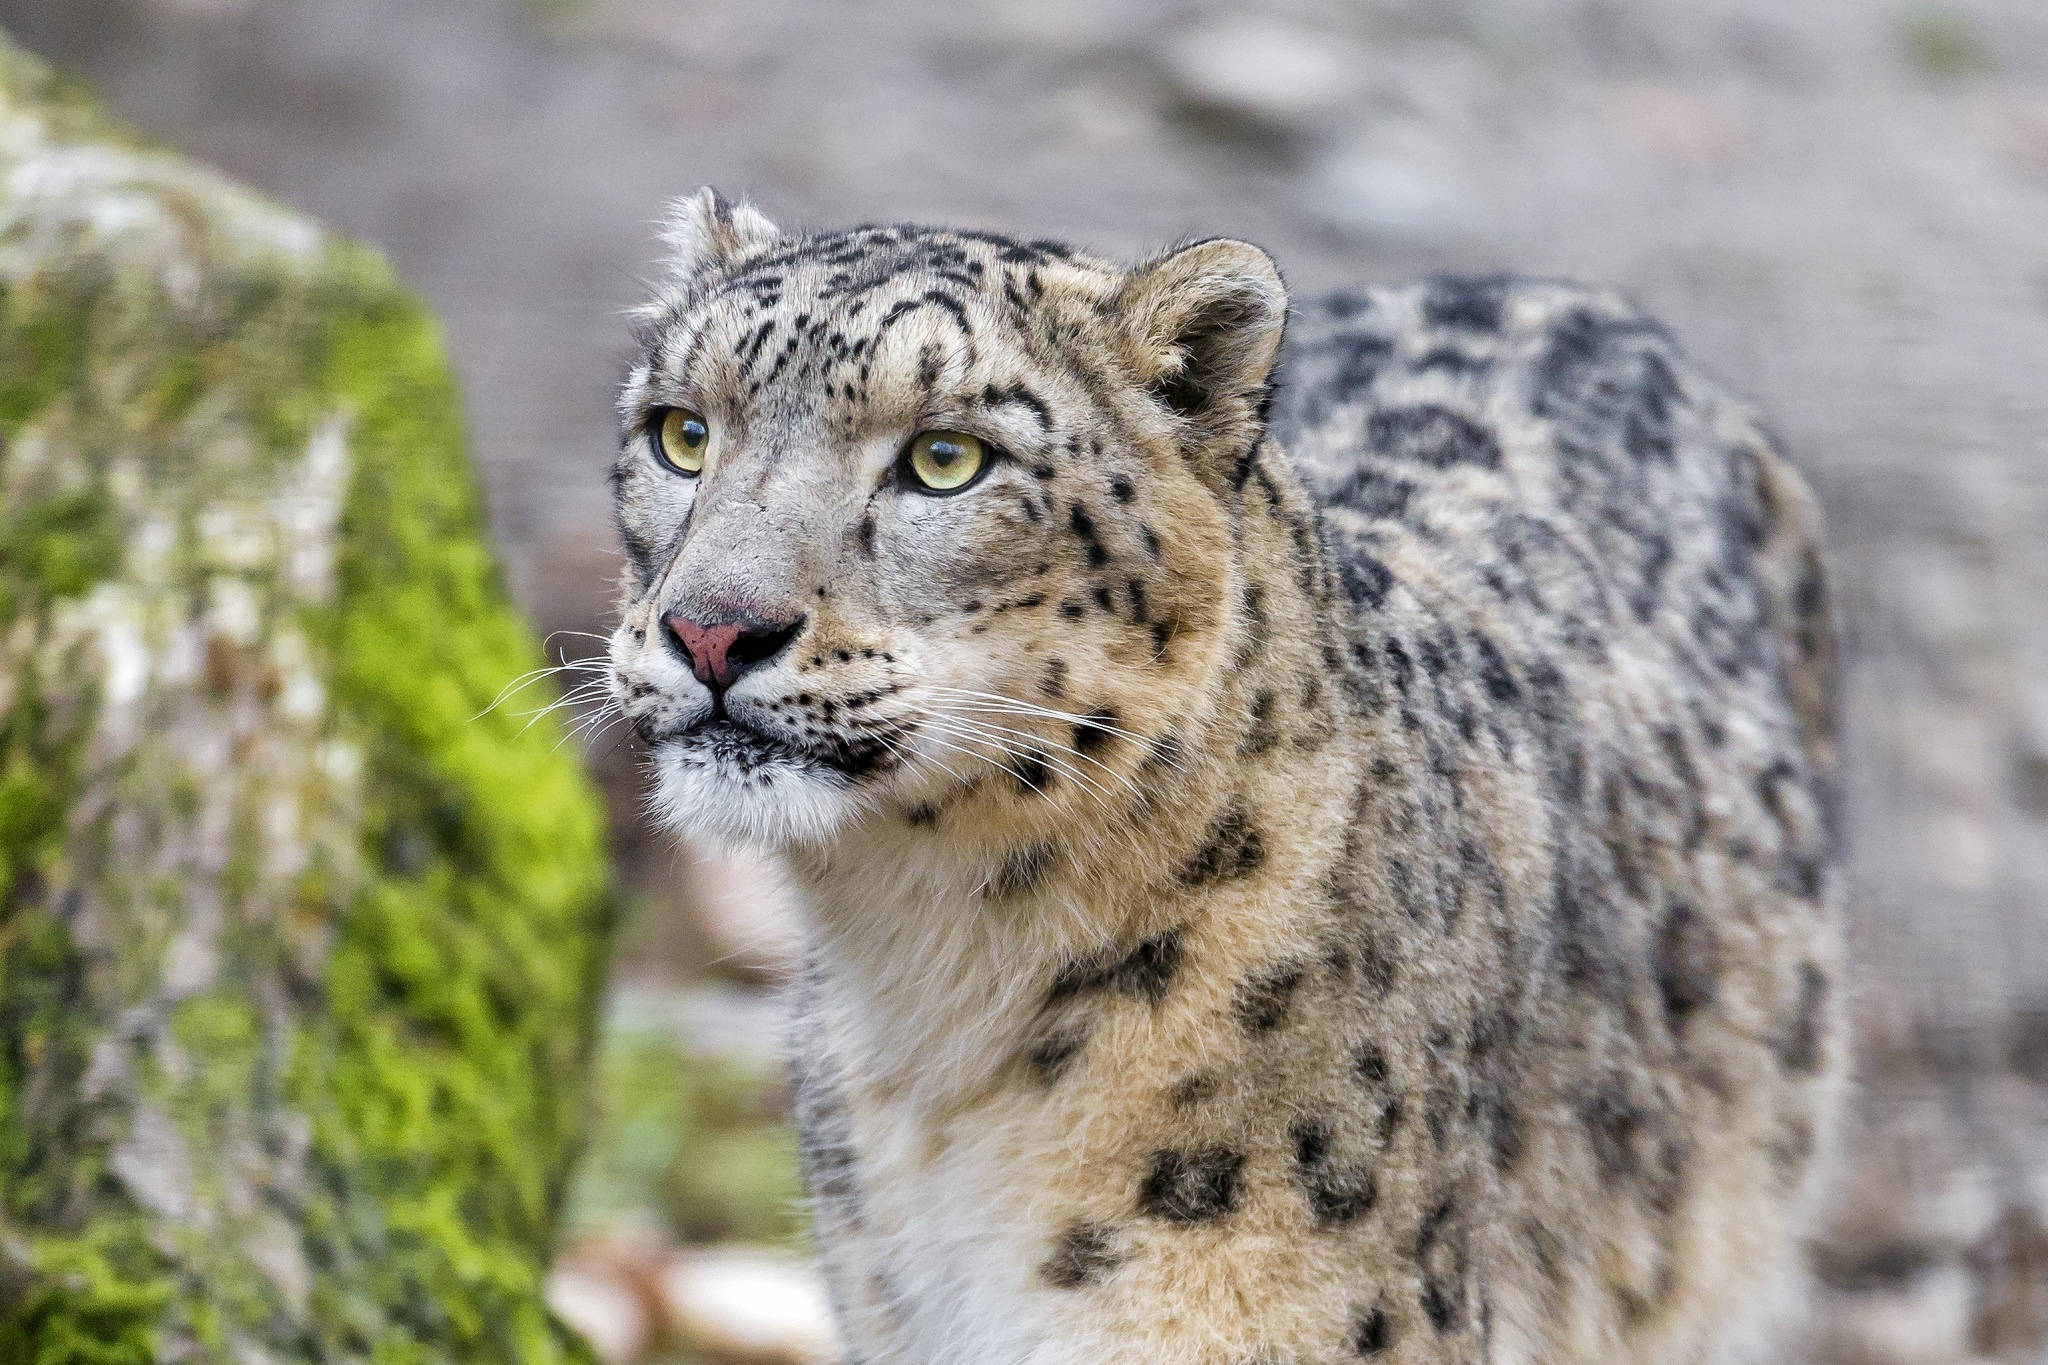 120853 Screensavers and Wallpapers Snow Leopard for phone. Download animals, snow leopard, leopard, muzzle, predator, wild cat, wildcat, irbis pictures for free